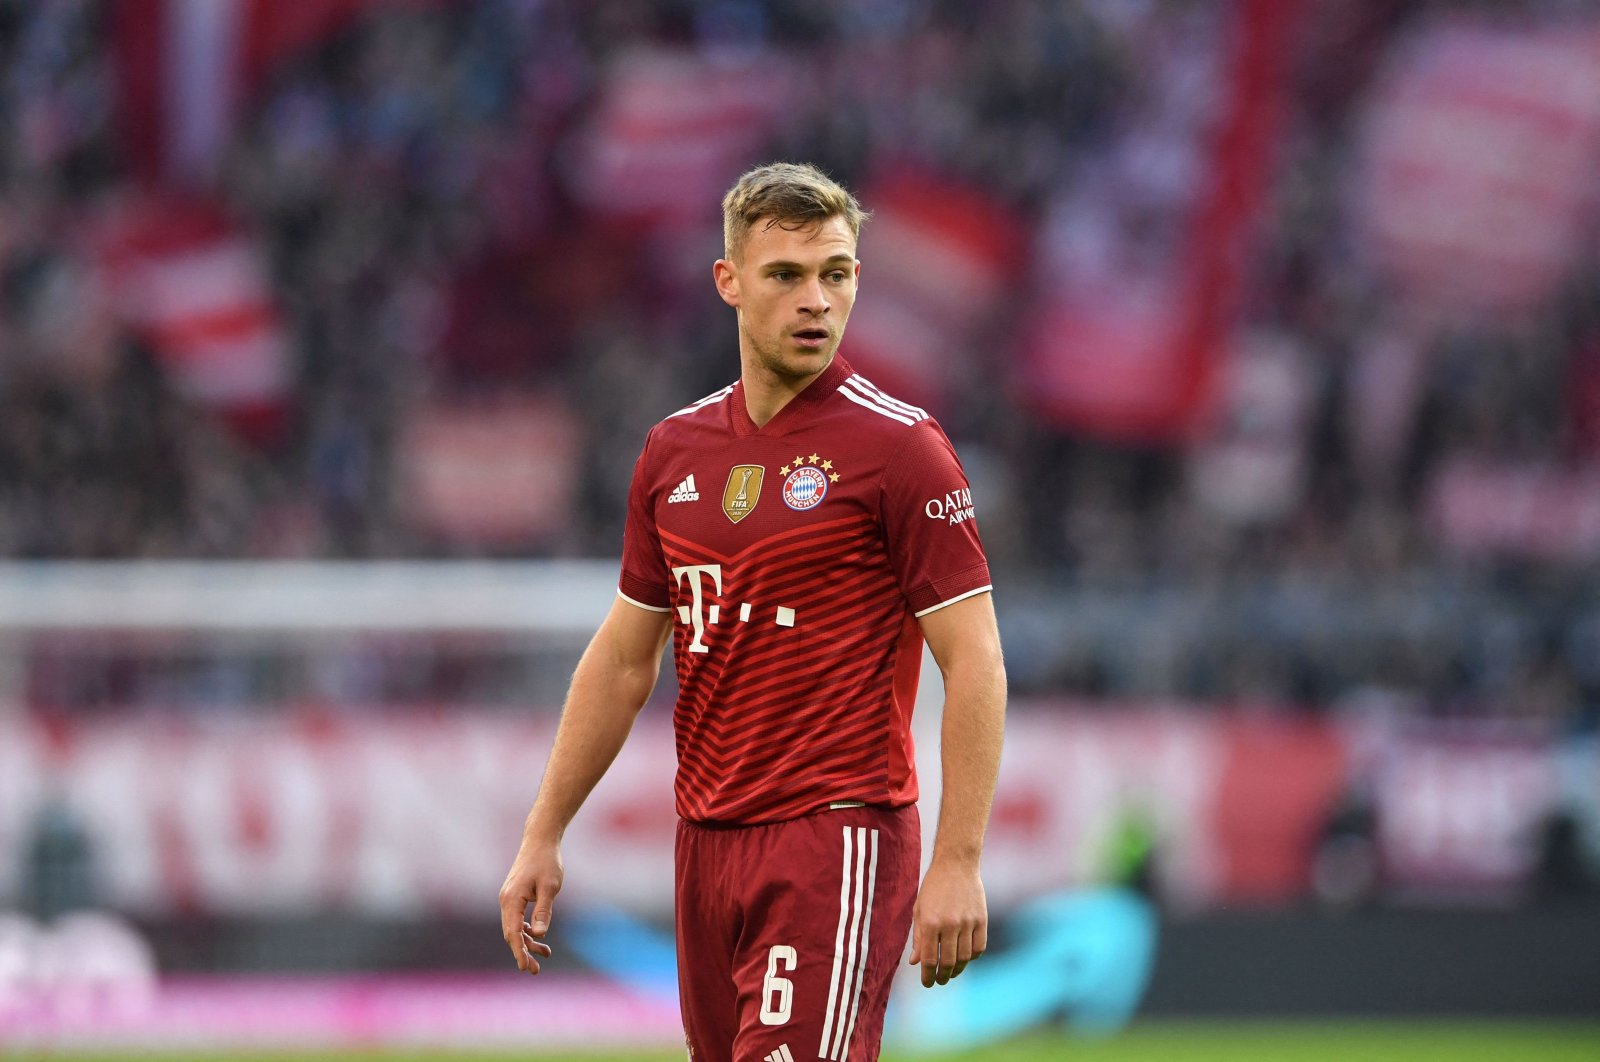 Bayern Munich&#039;s Joshua Kimmich is pictured during a match against SC Freiburg, in Munich, Germany, Nov. 6, 2021. (AFP PHOTO) 